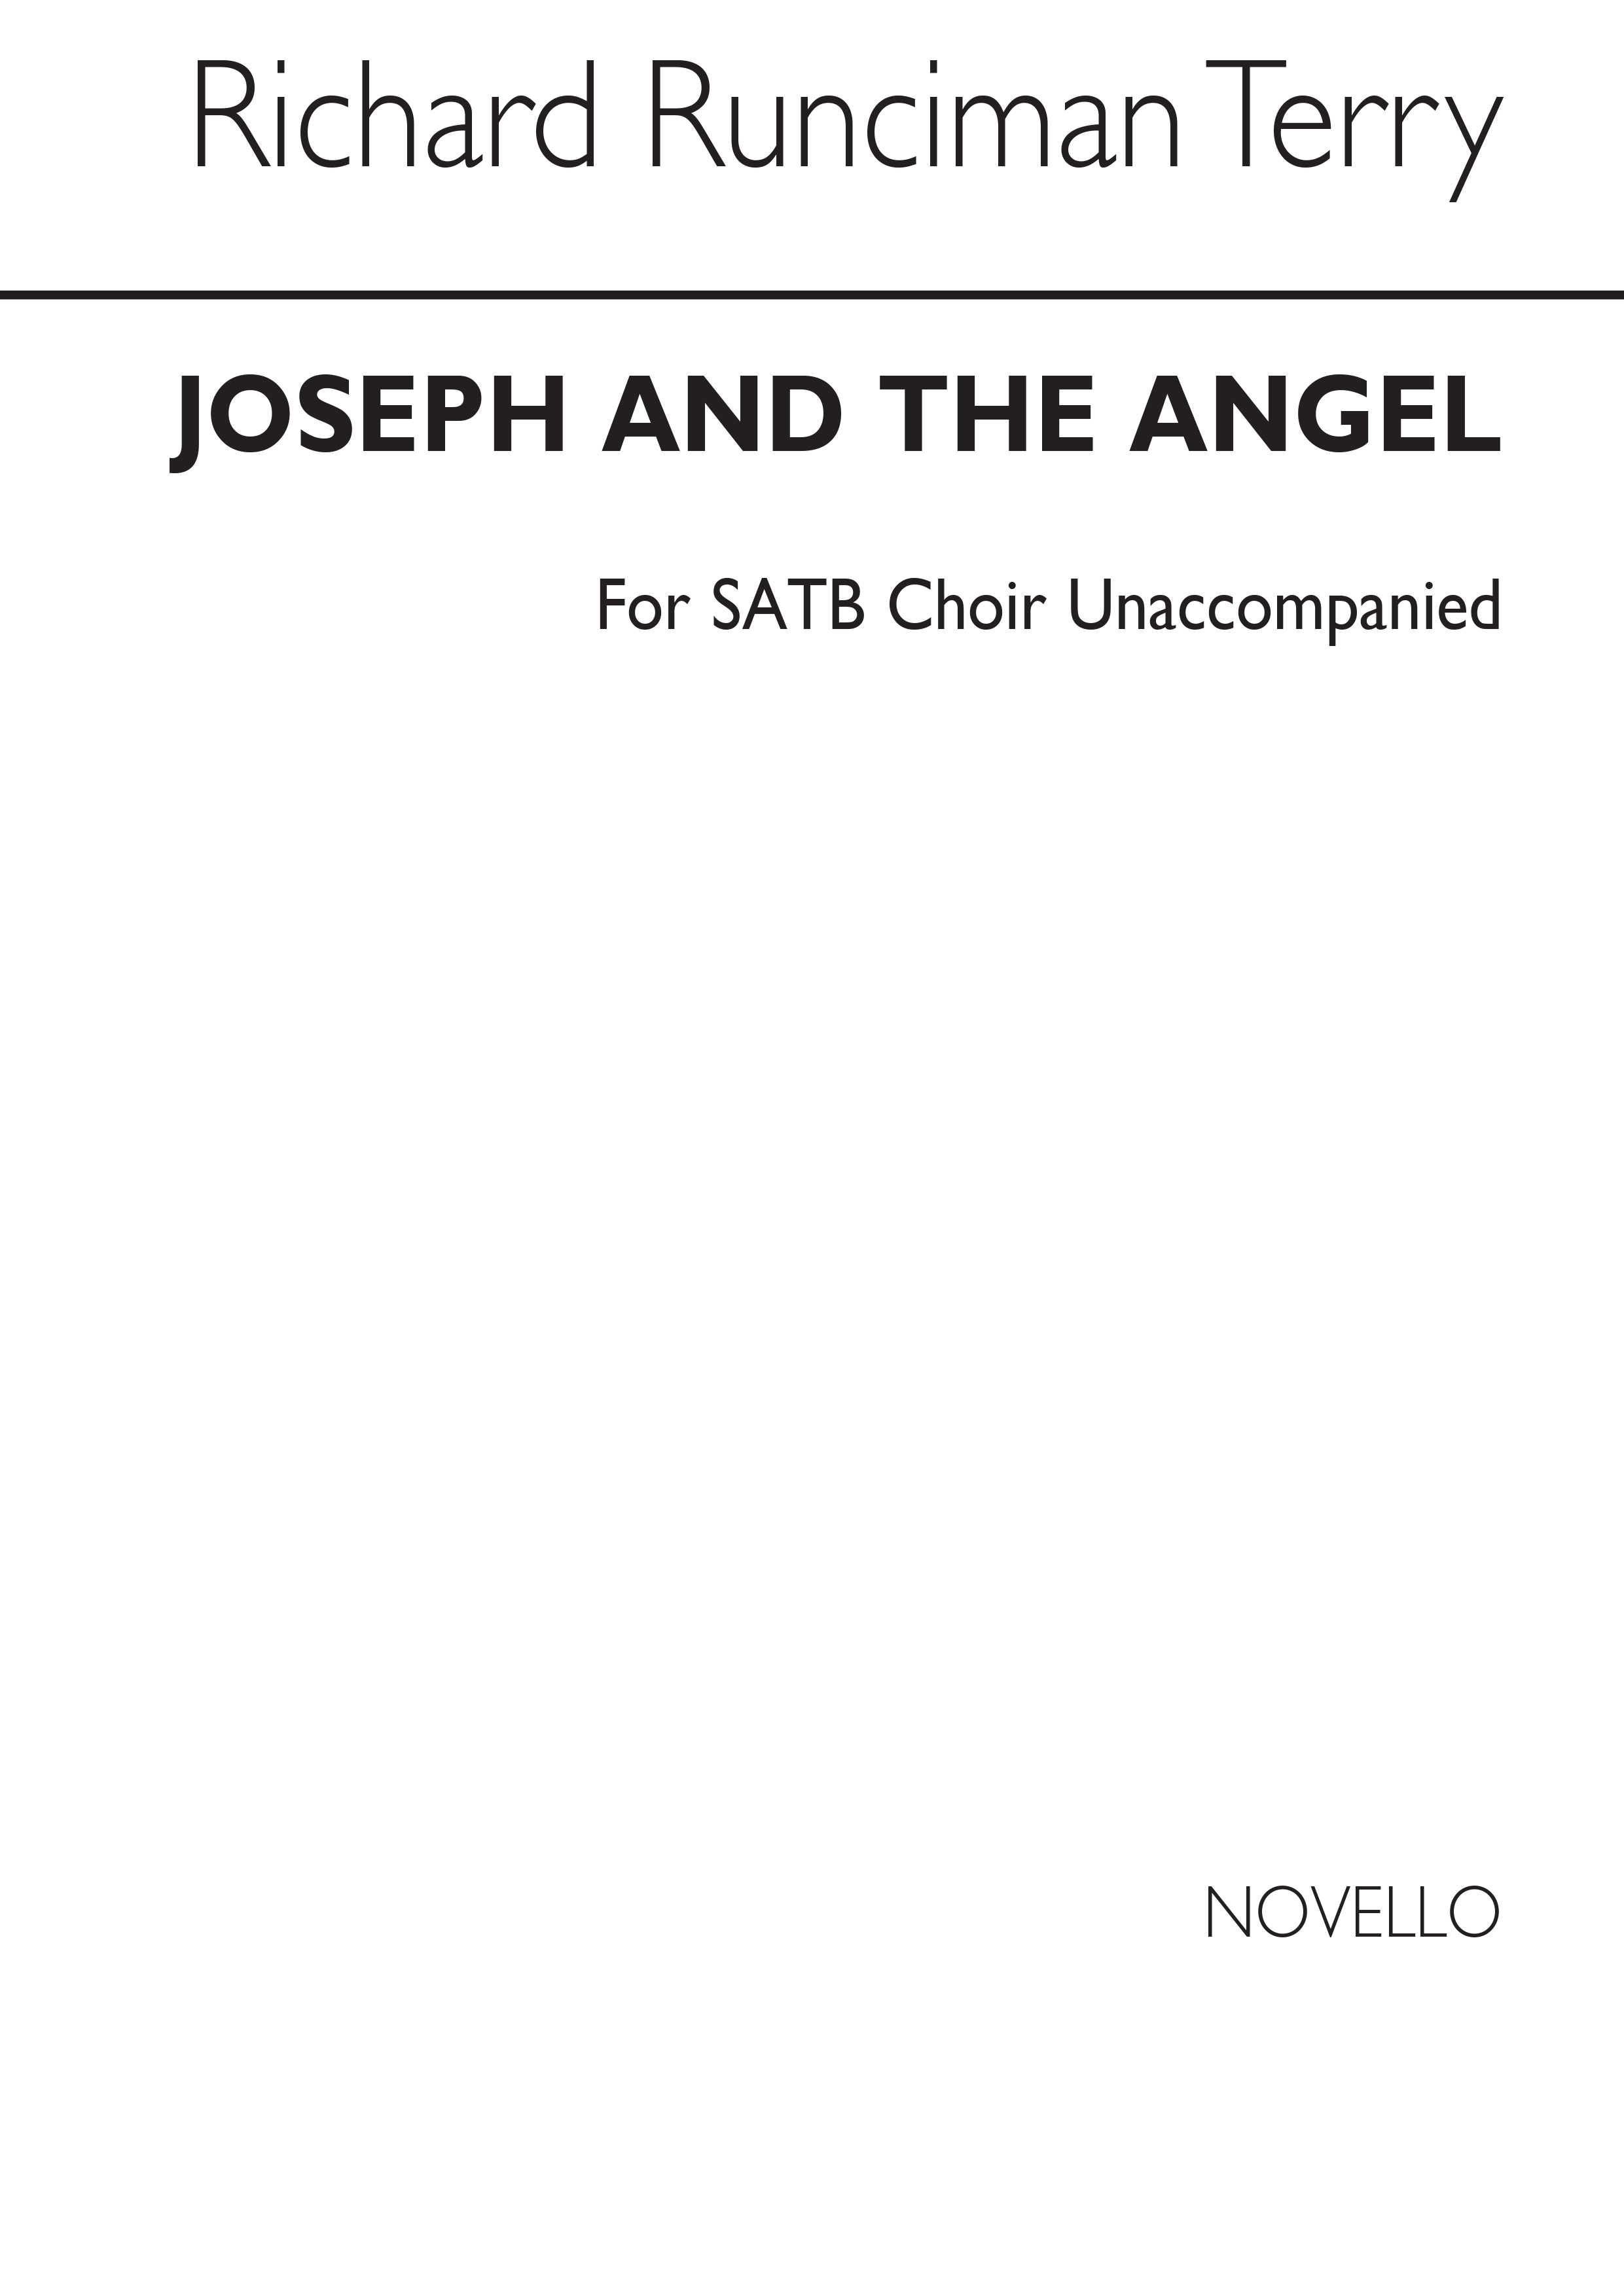 R. R. Terry: Joseph And The Angel: SATB: Vocal Score